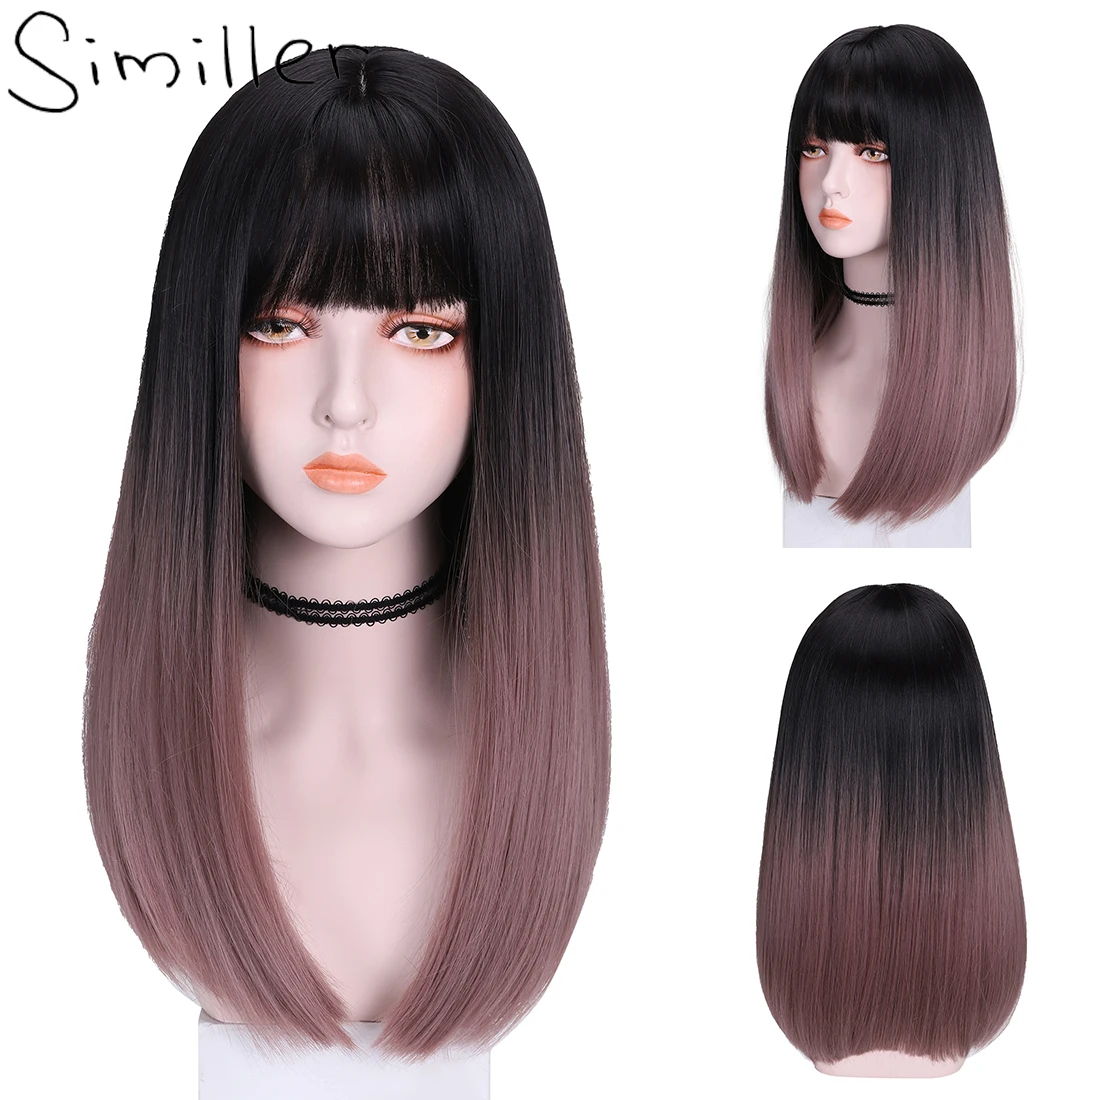 

Similler Highlight Ombre Synthetic Hair Medium Straight Wigs for Women Cosplay Wig Central Parting with Bangs